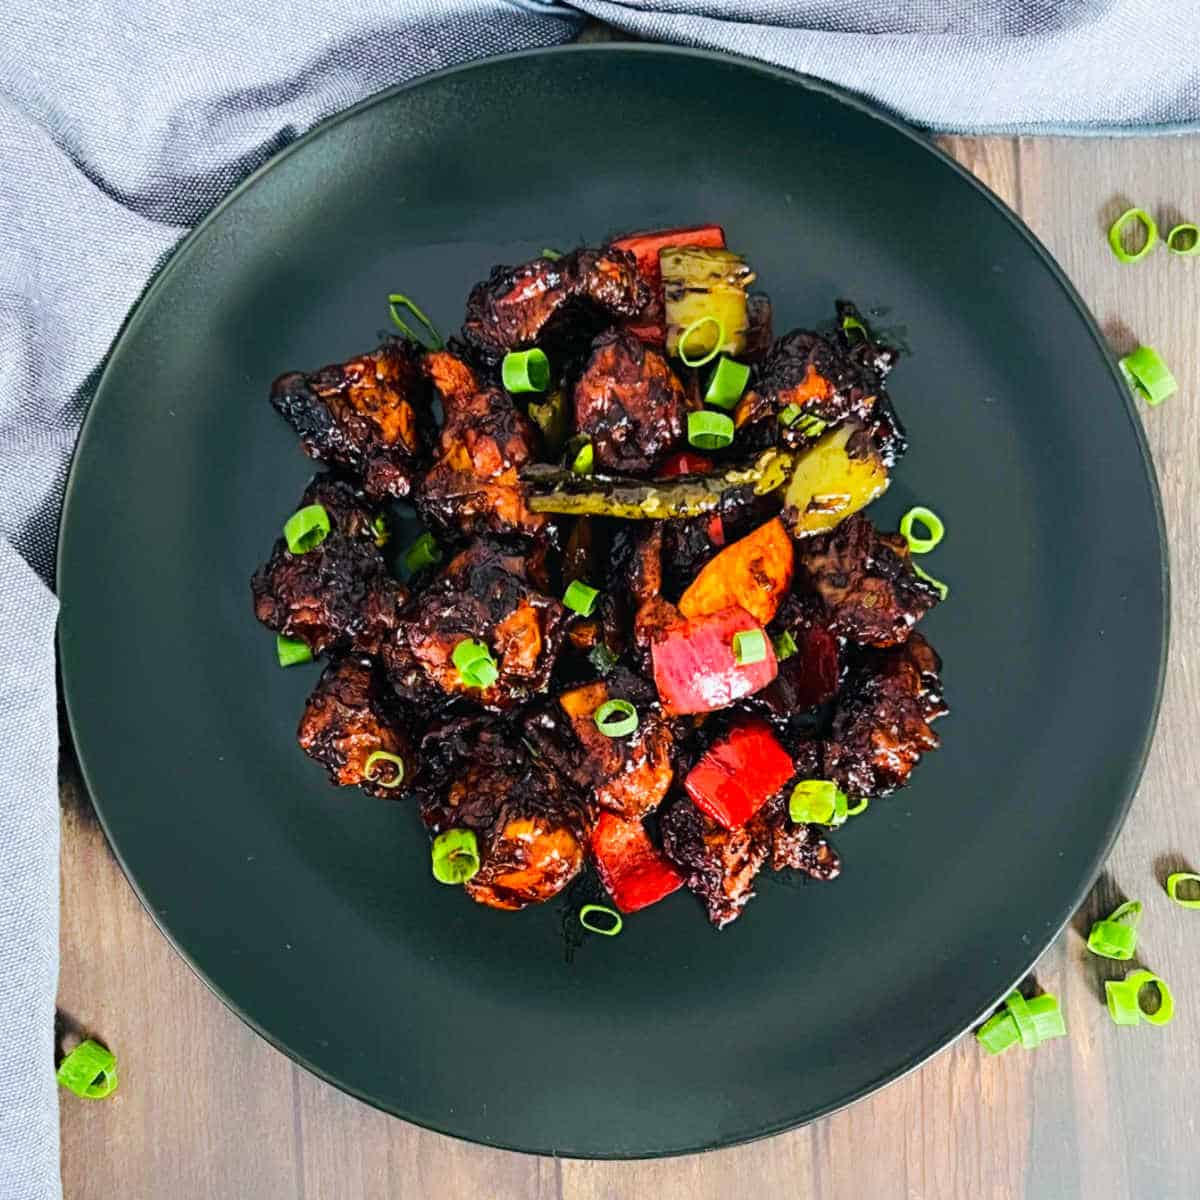 Chilli chicken garnished with green onions and placed on a wooden surface.